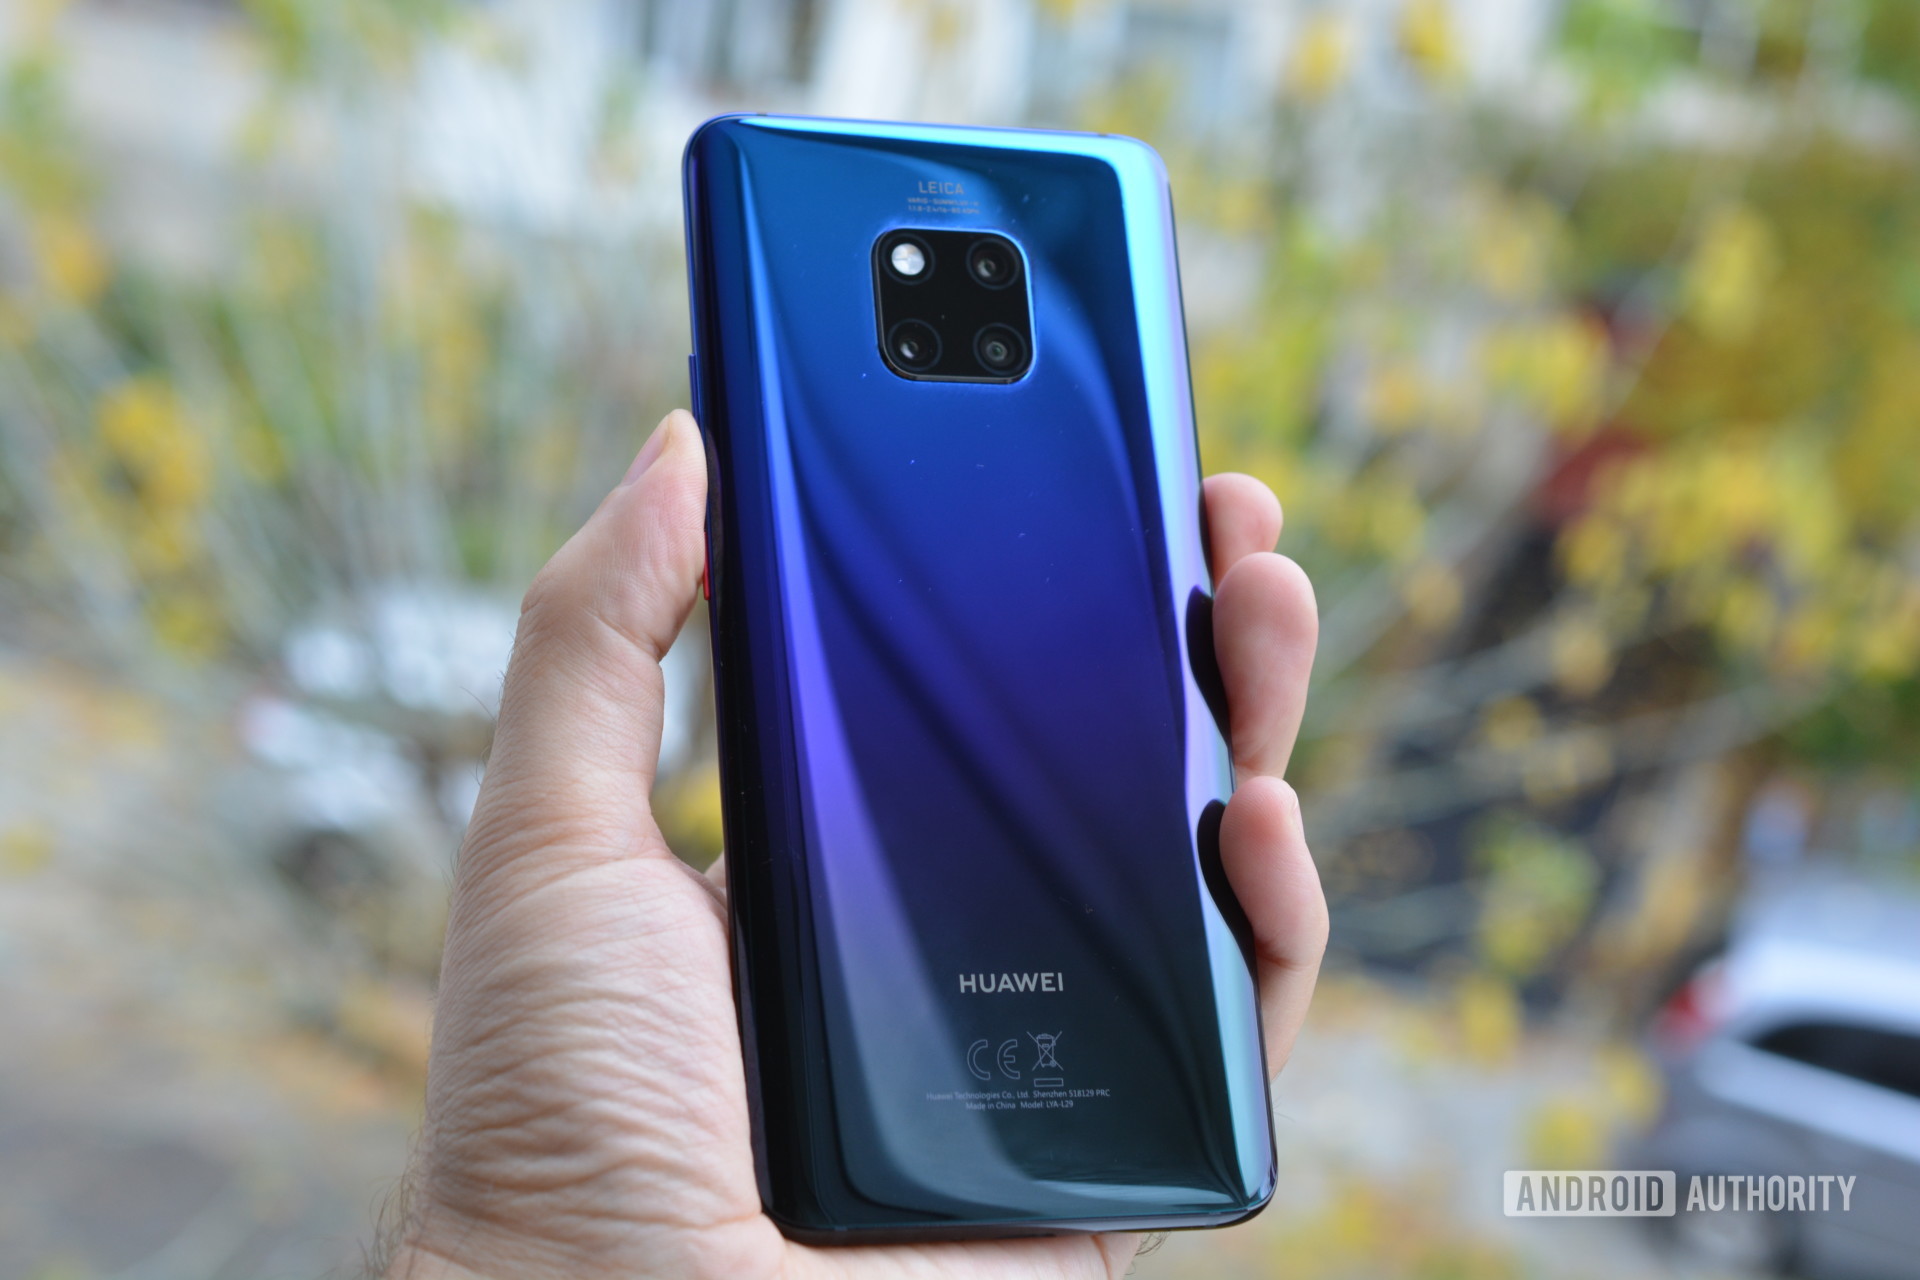 Kalmerend Magazijn vers HUAWEI Mate 20 Pro launched in India: Triple camera, beautiful design, and  high-end specs - Android Authority